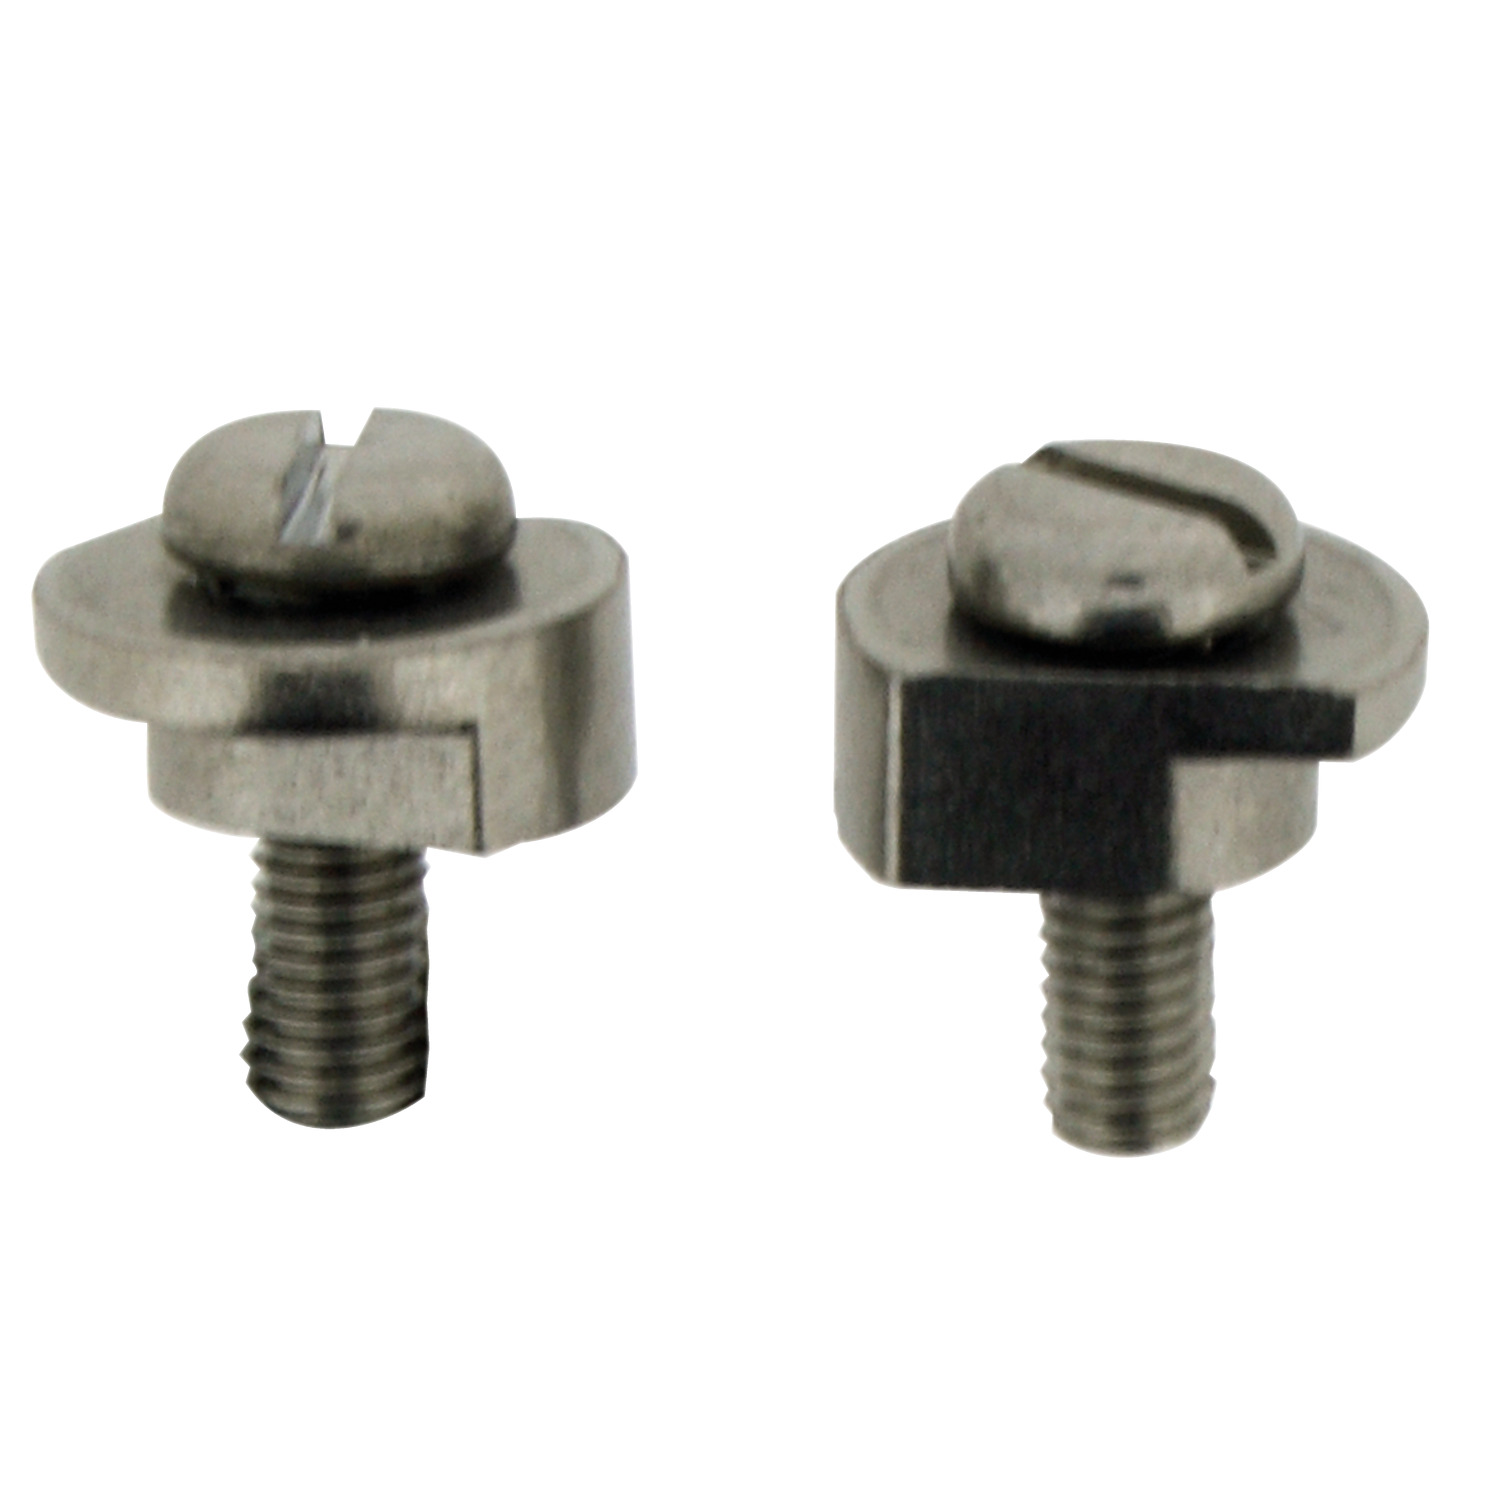 P0292.158 P0292.008 Clamp cleats 